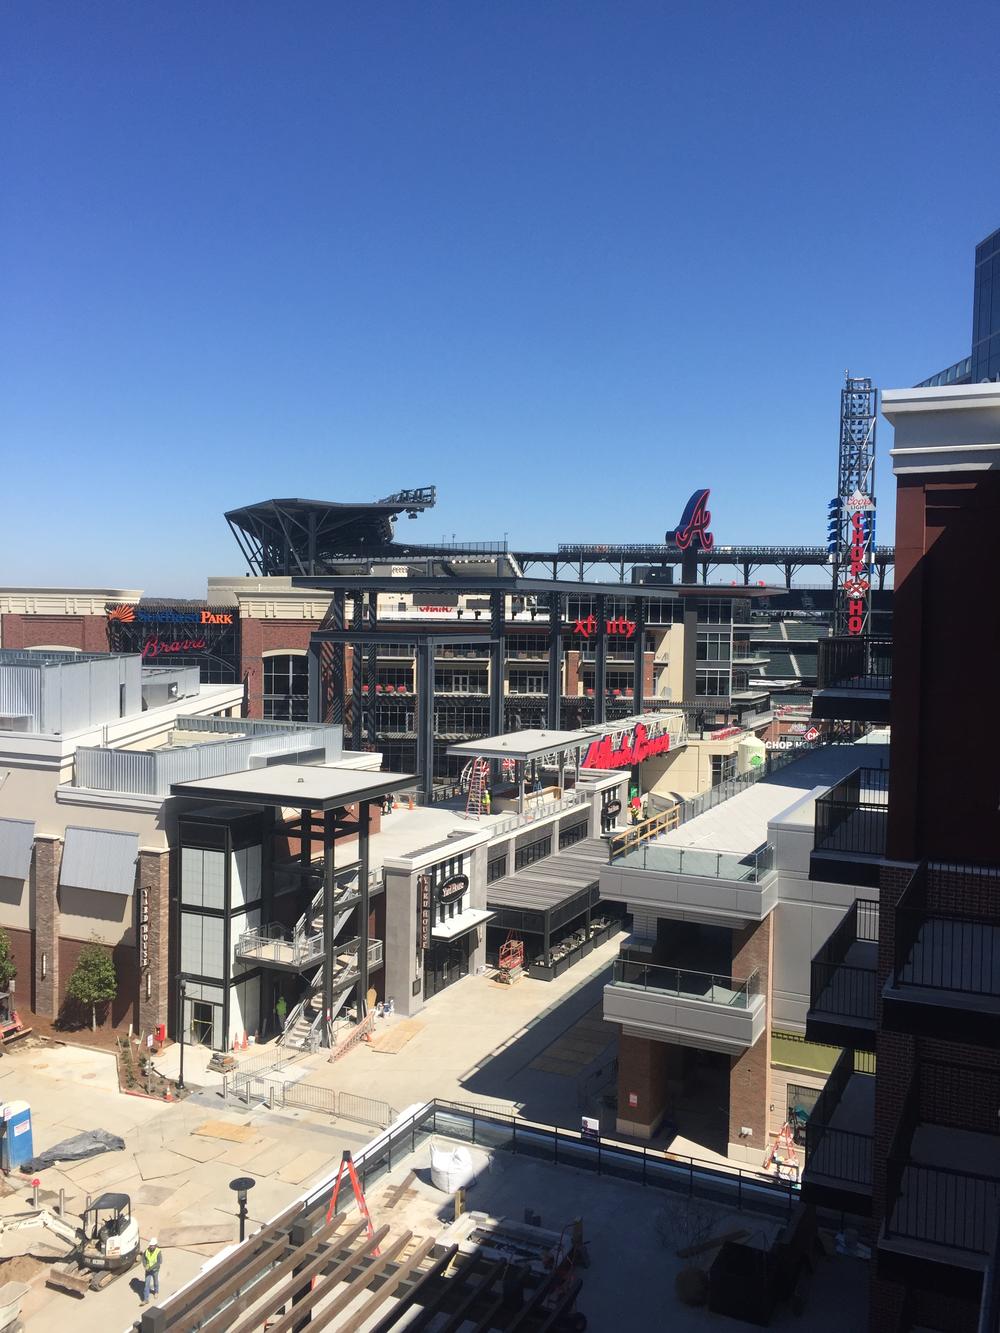 The view of SunTrust Park from The Battery apartments